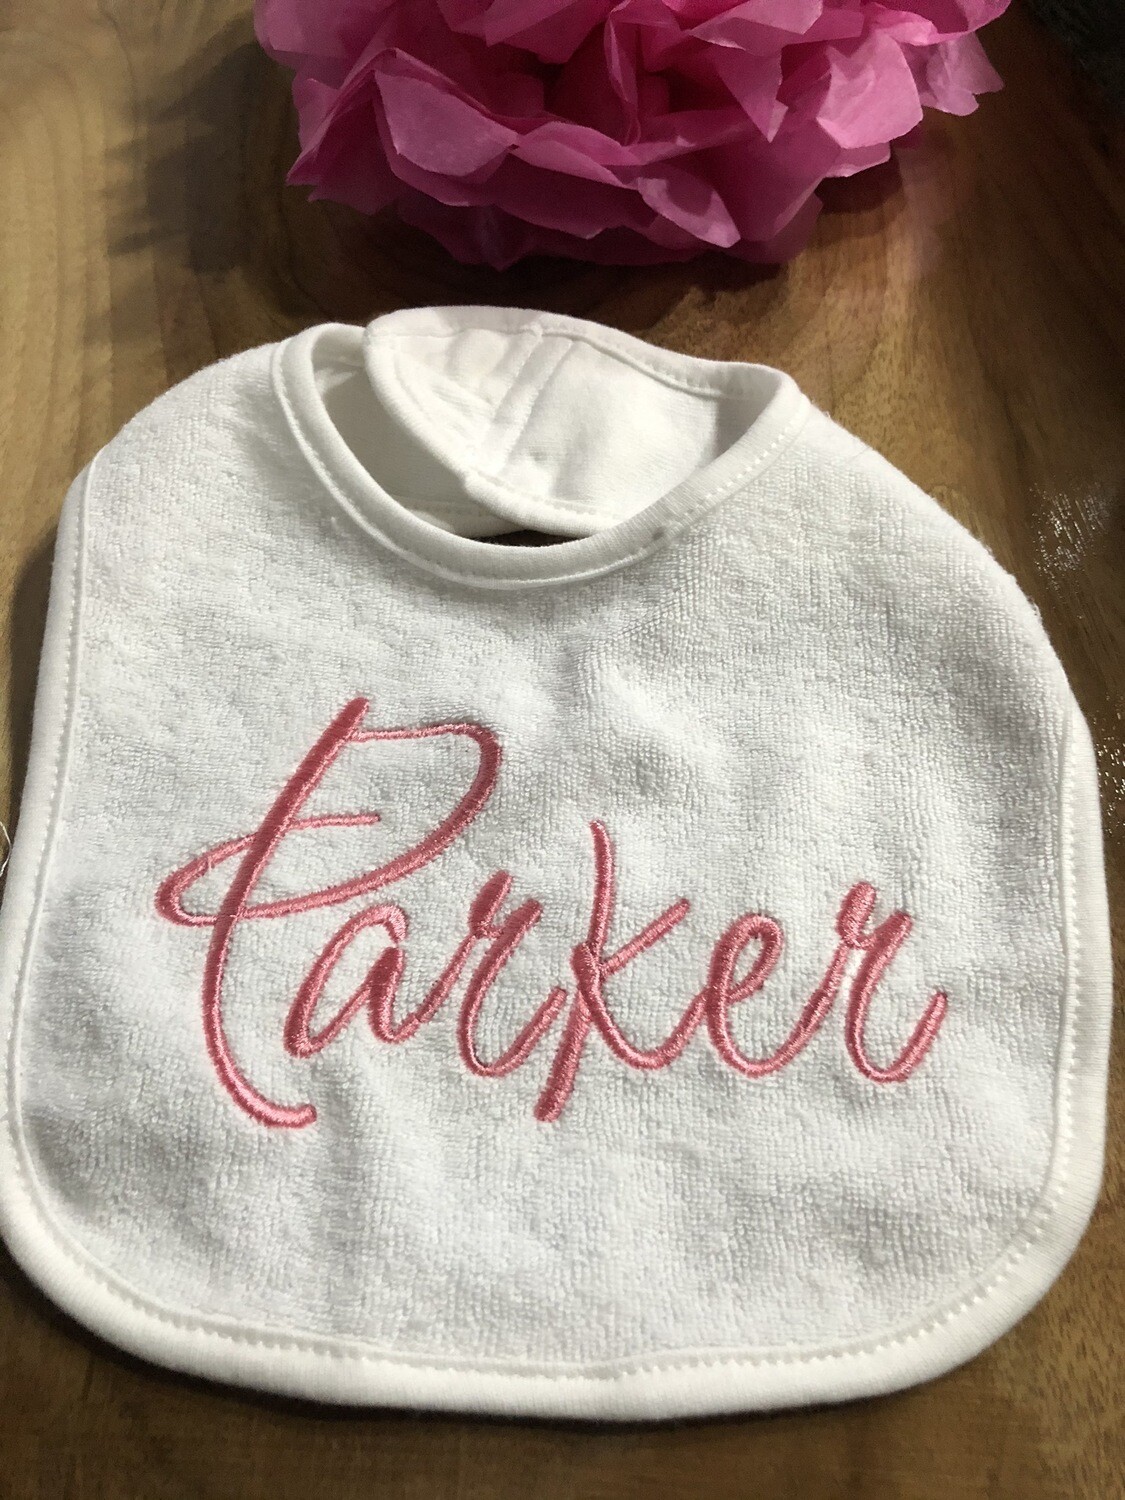 Baby's Personalized Embroidered Bib